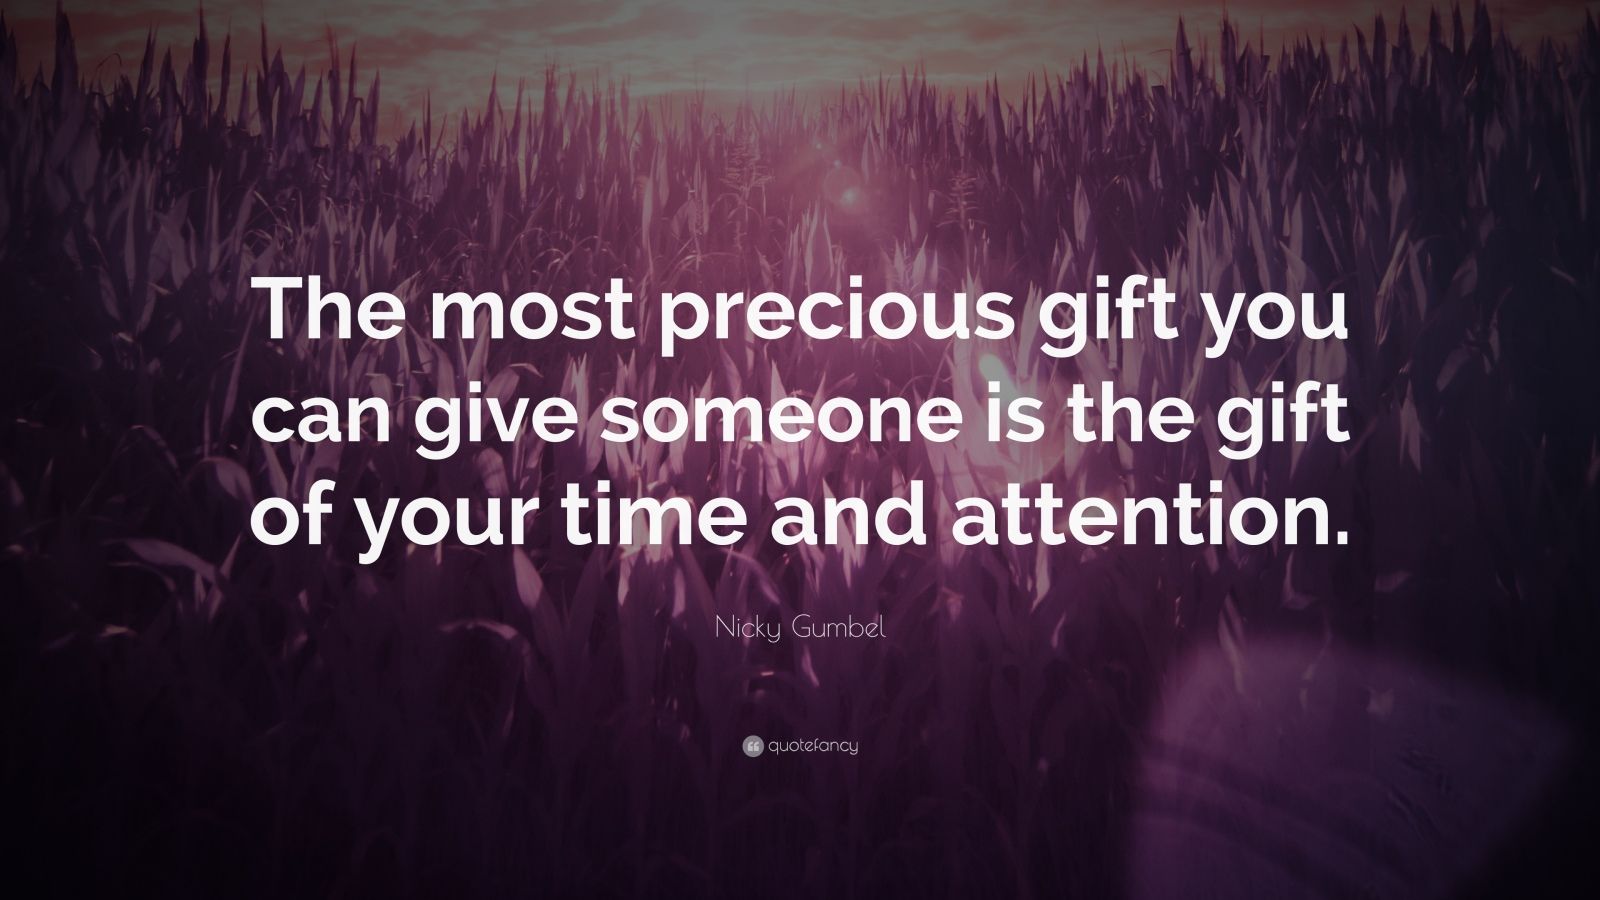 Nicky Gumbel Quote “The most precious gift you can give